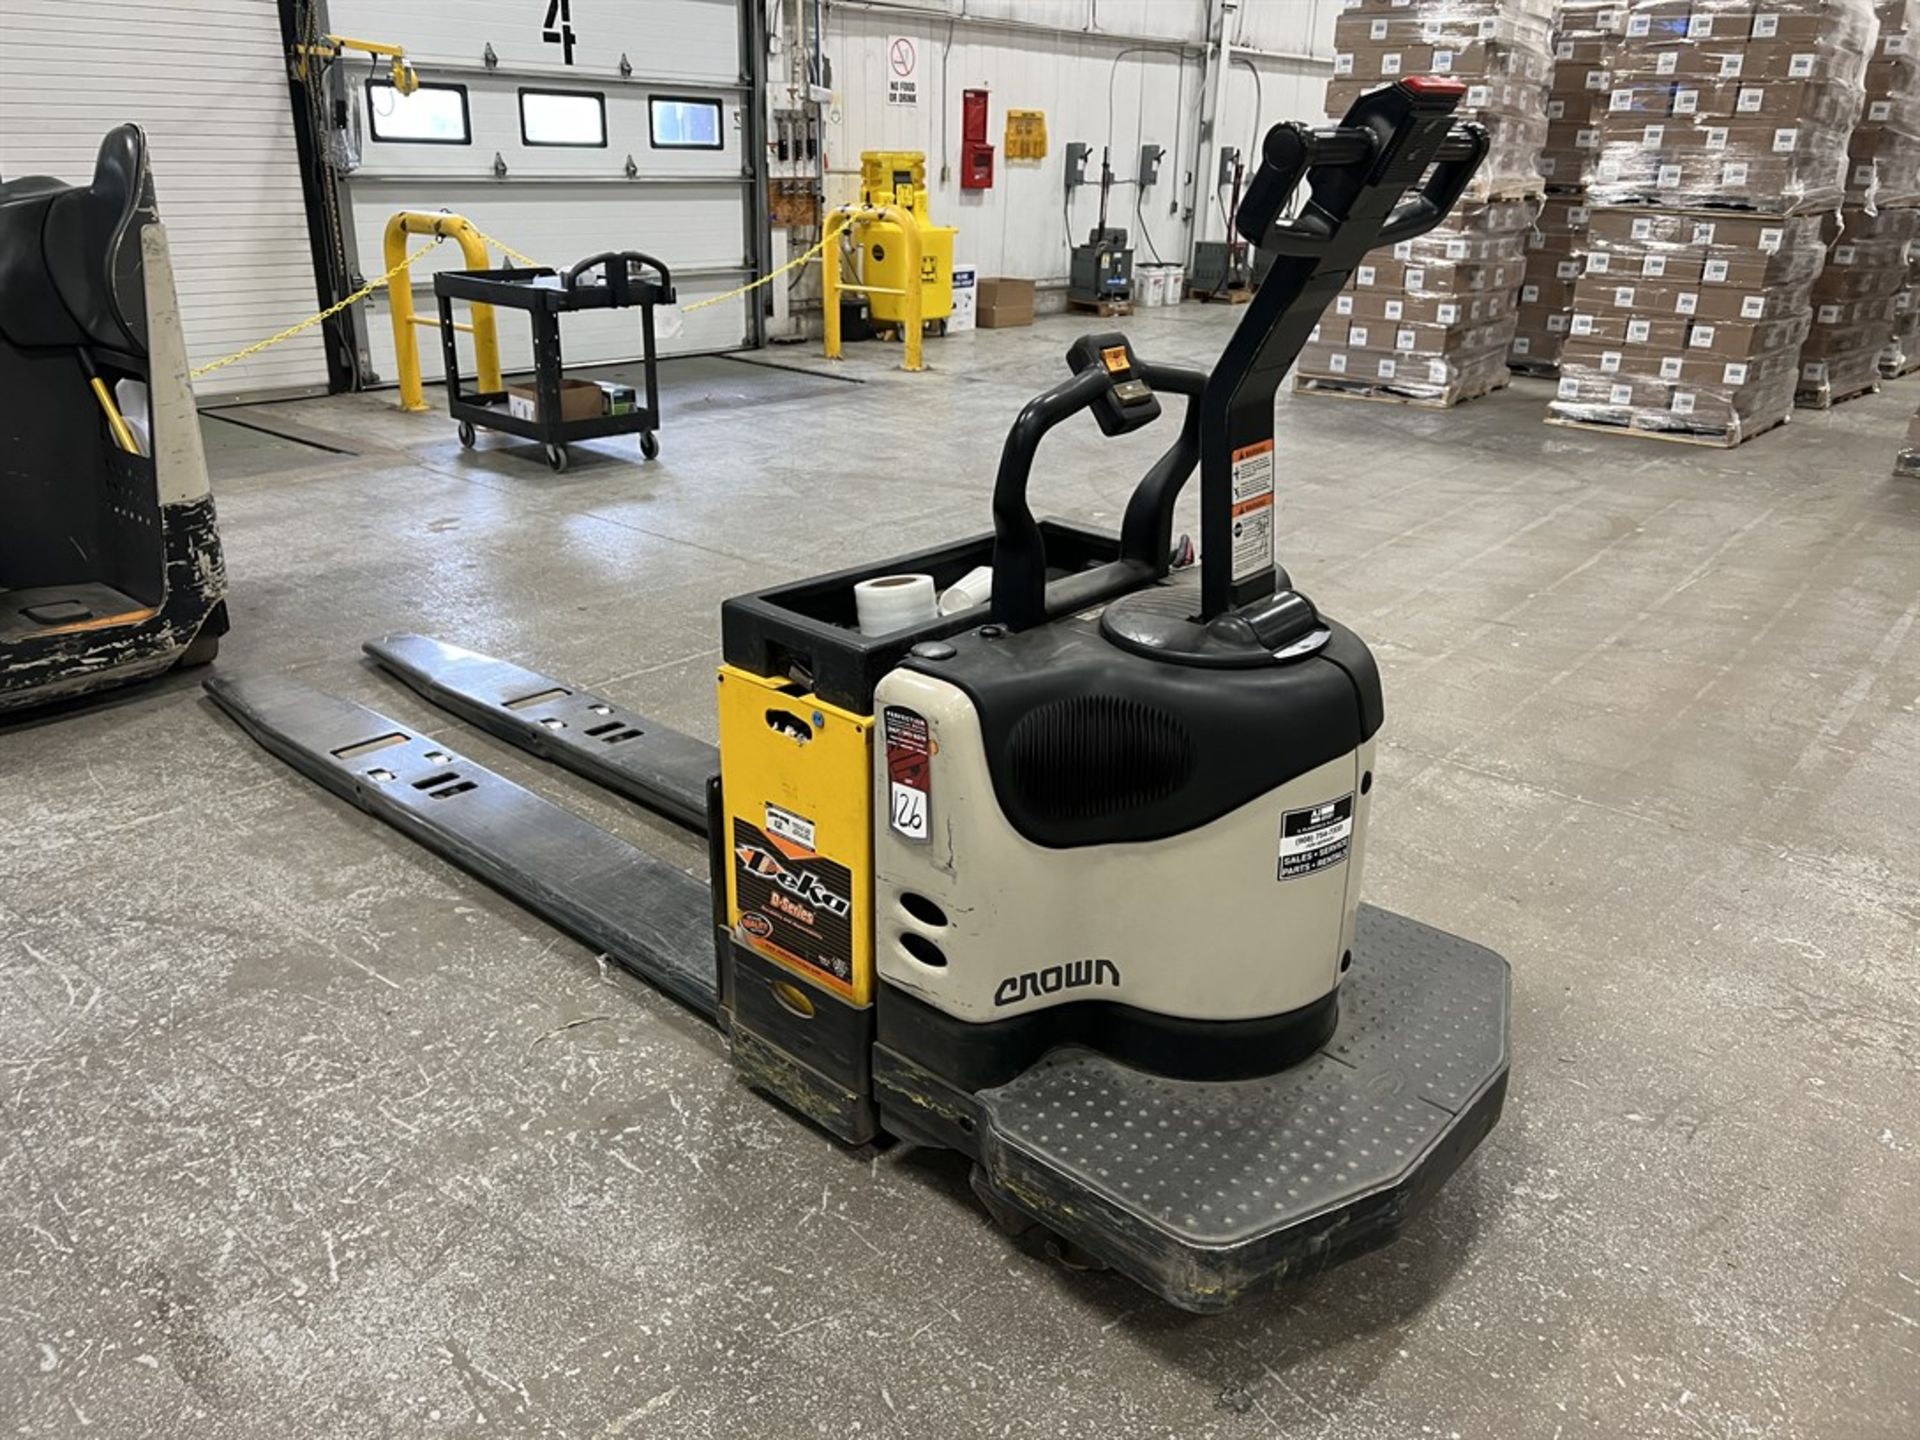 CROWN PE4000 Series Electric Rider Pallet Jack, s/n 6A217862, 6,000 Lb. Capacity, 24V, 8' Fork - Image 2 of 5